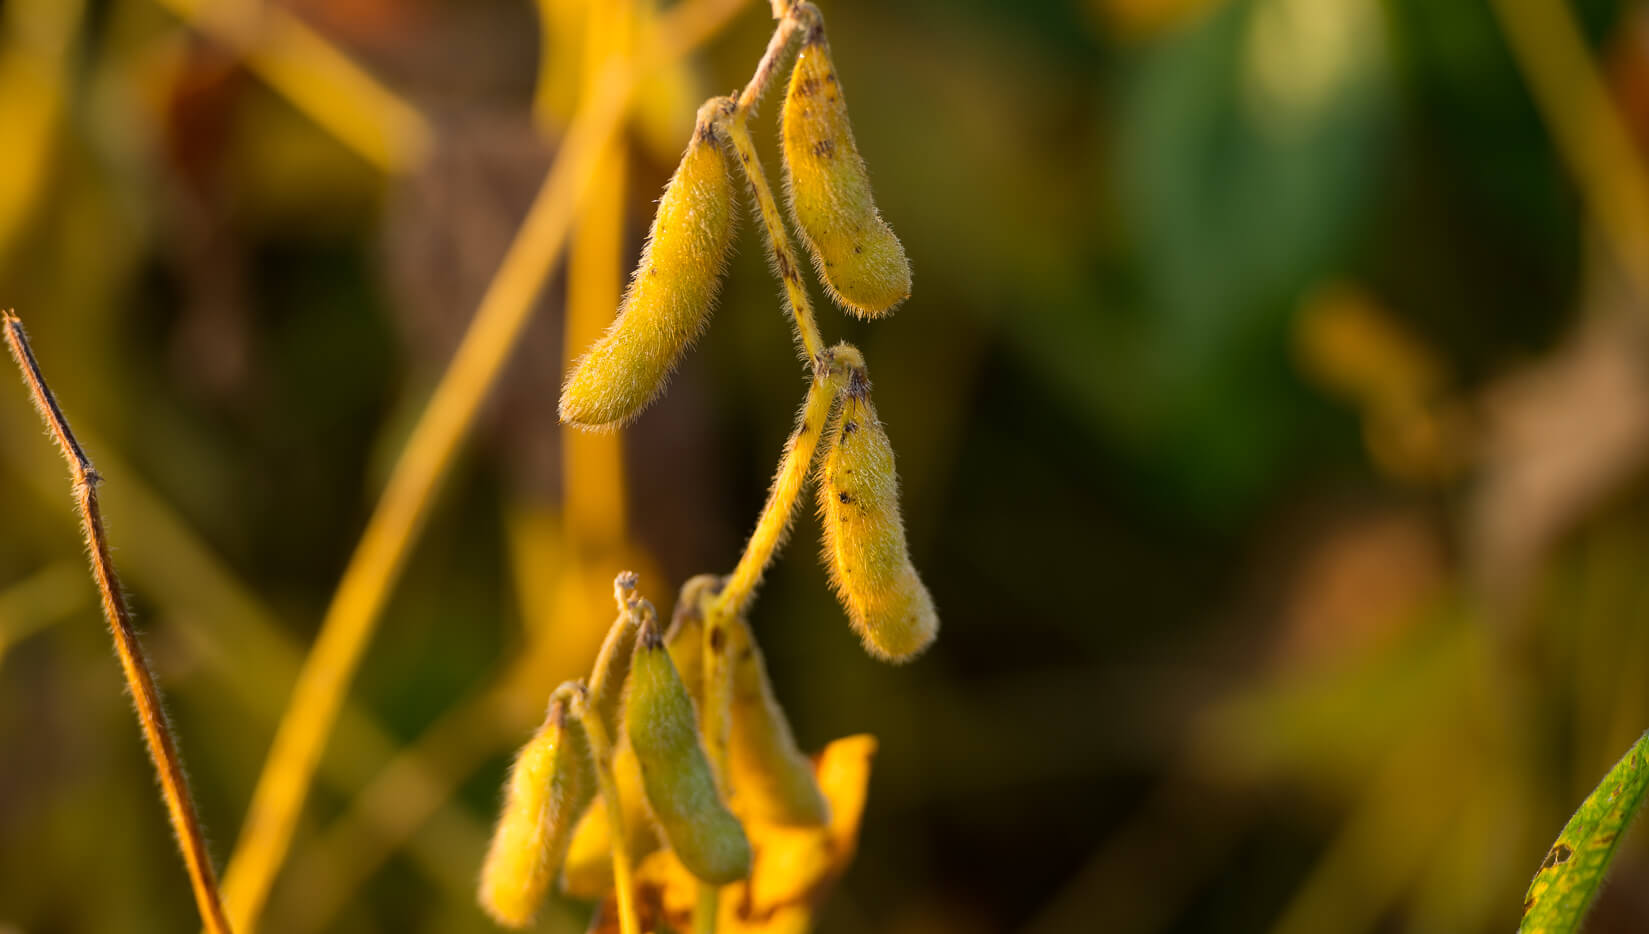 Soybean pods in the evening sun